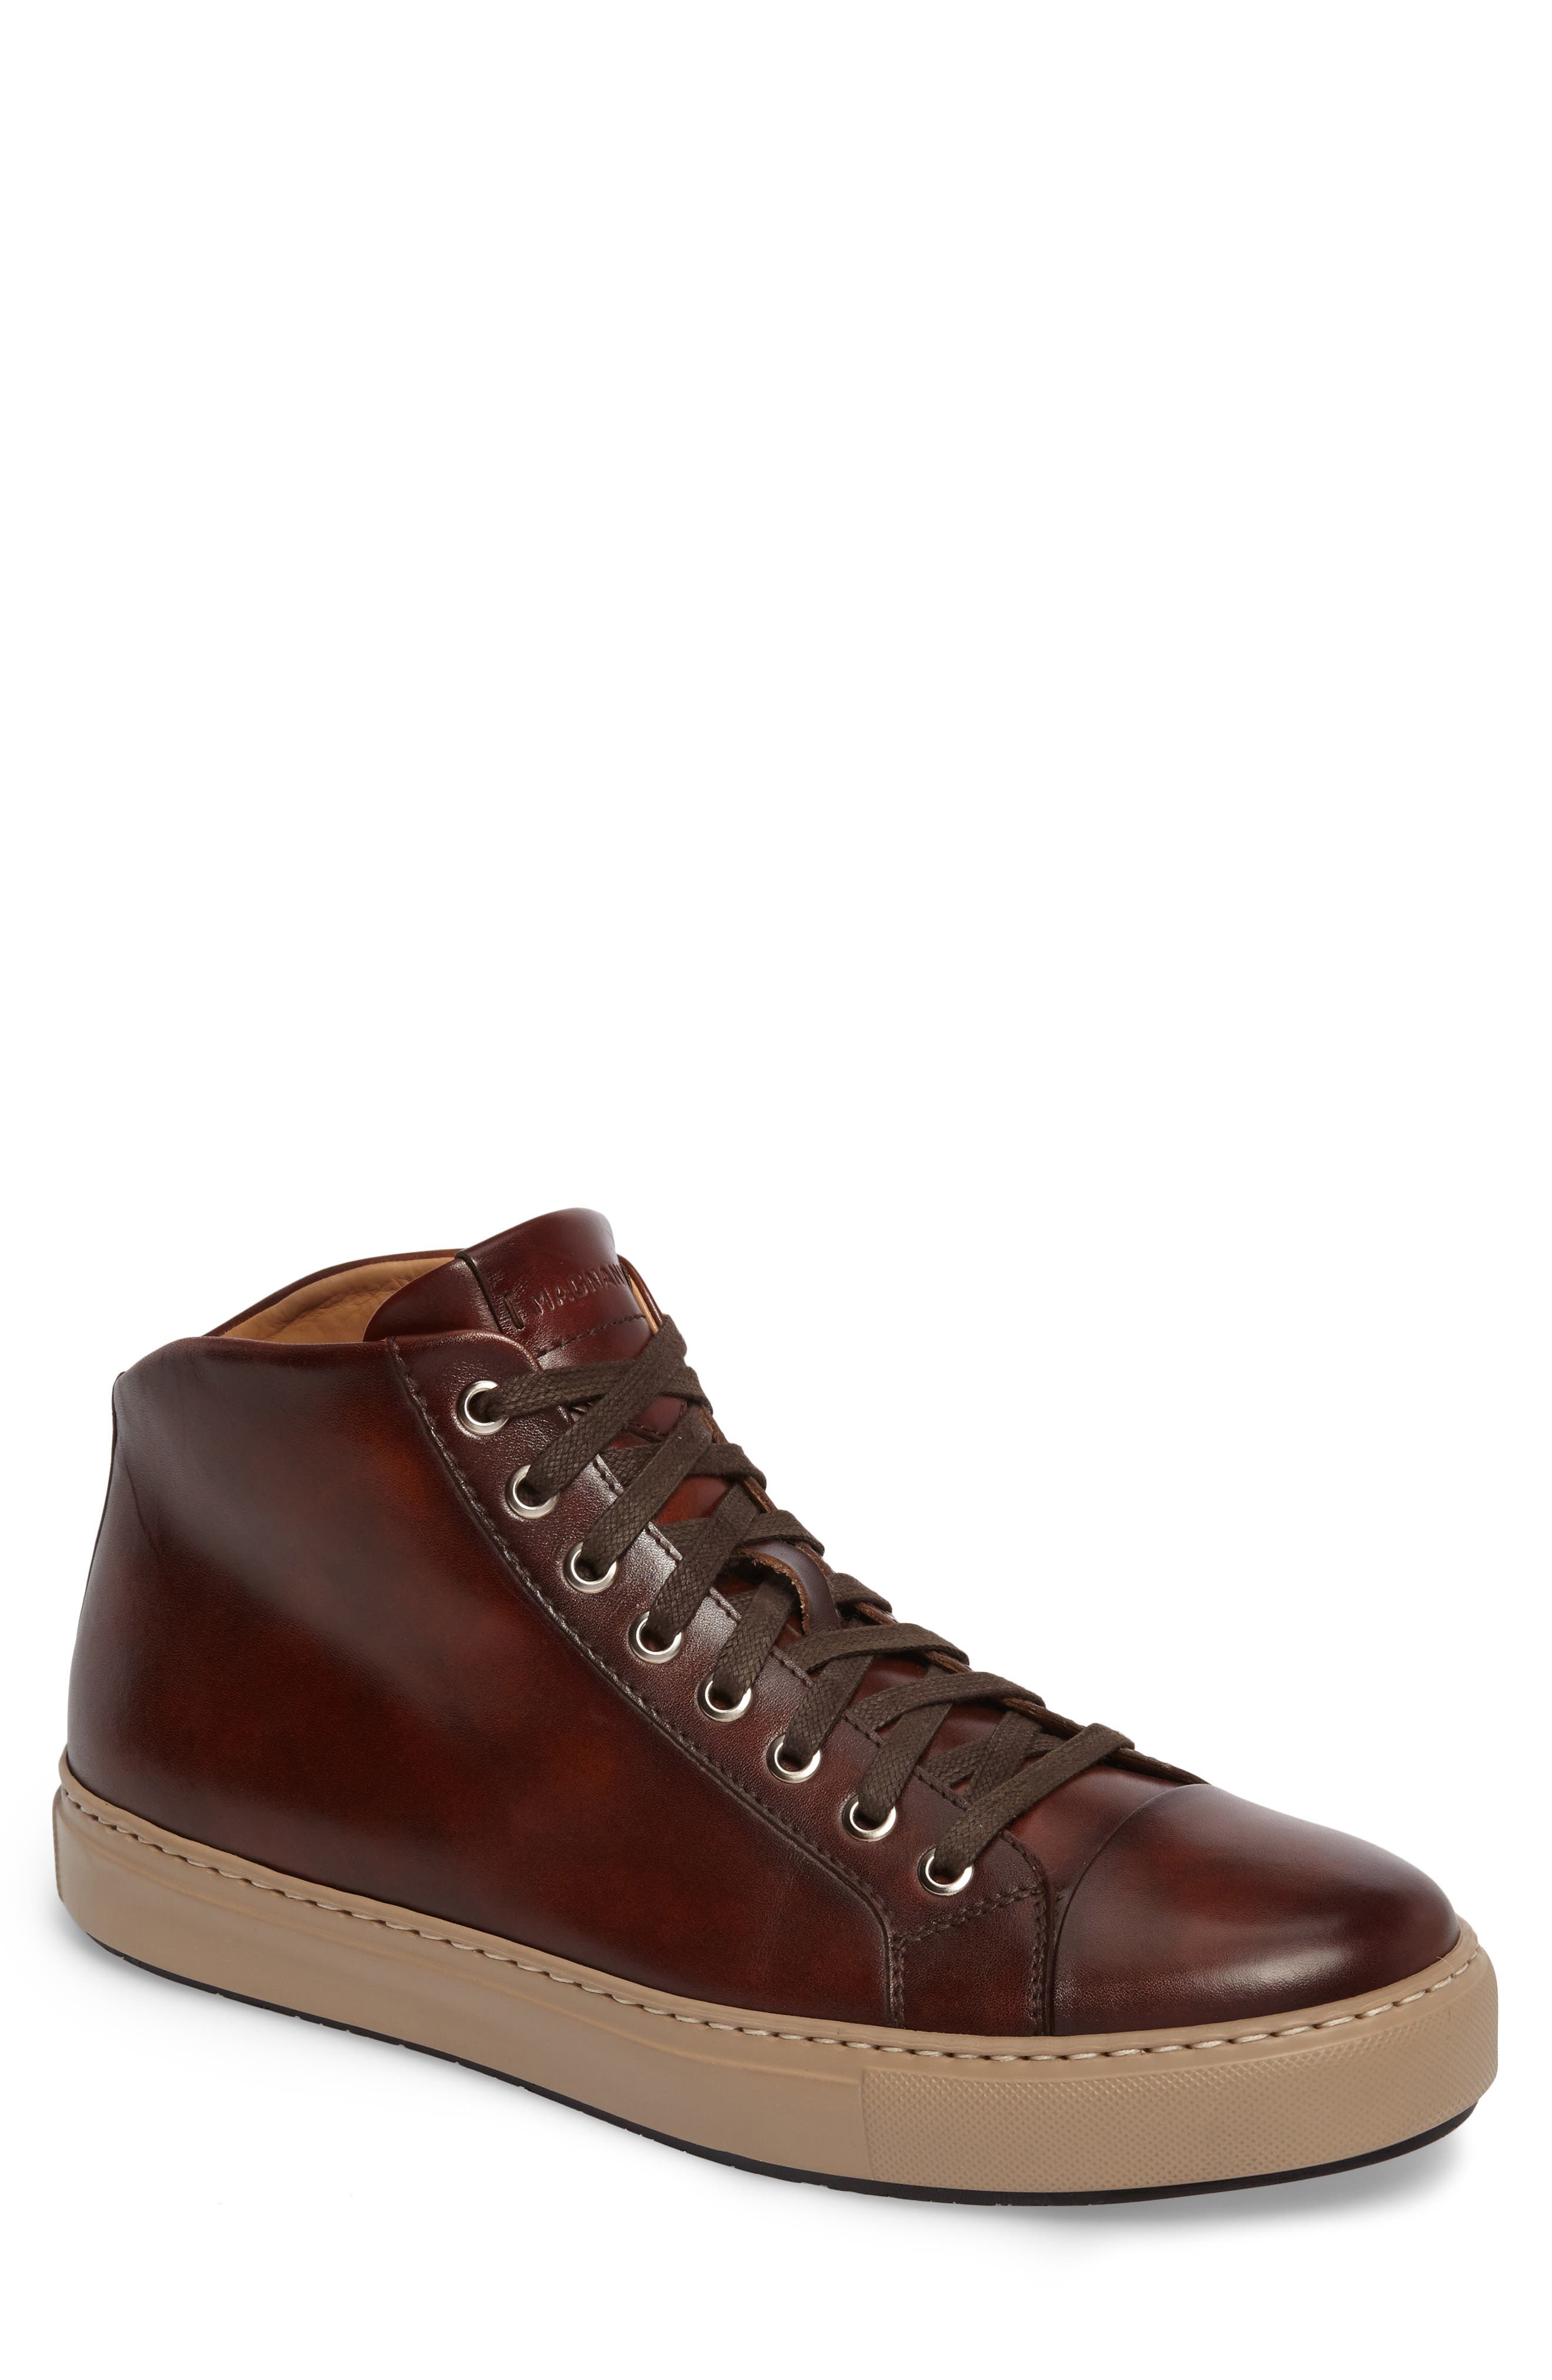 magnanni high top sneakers